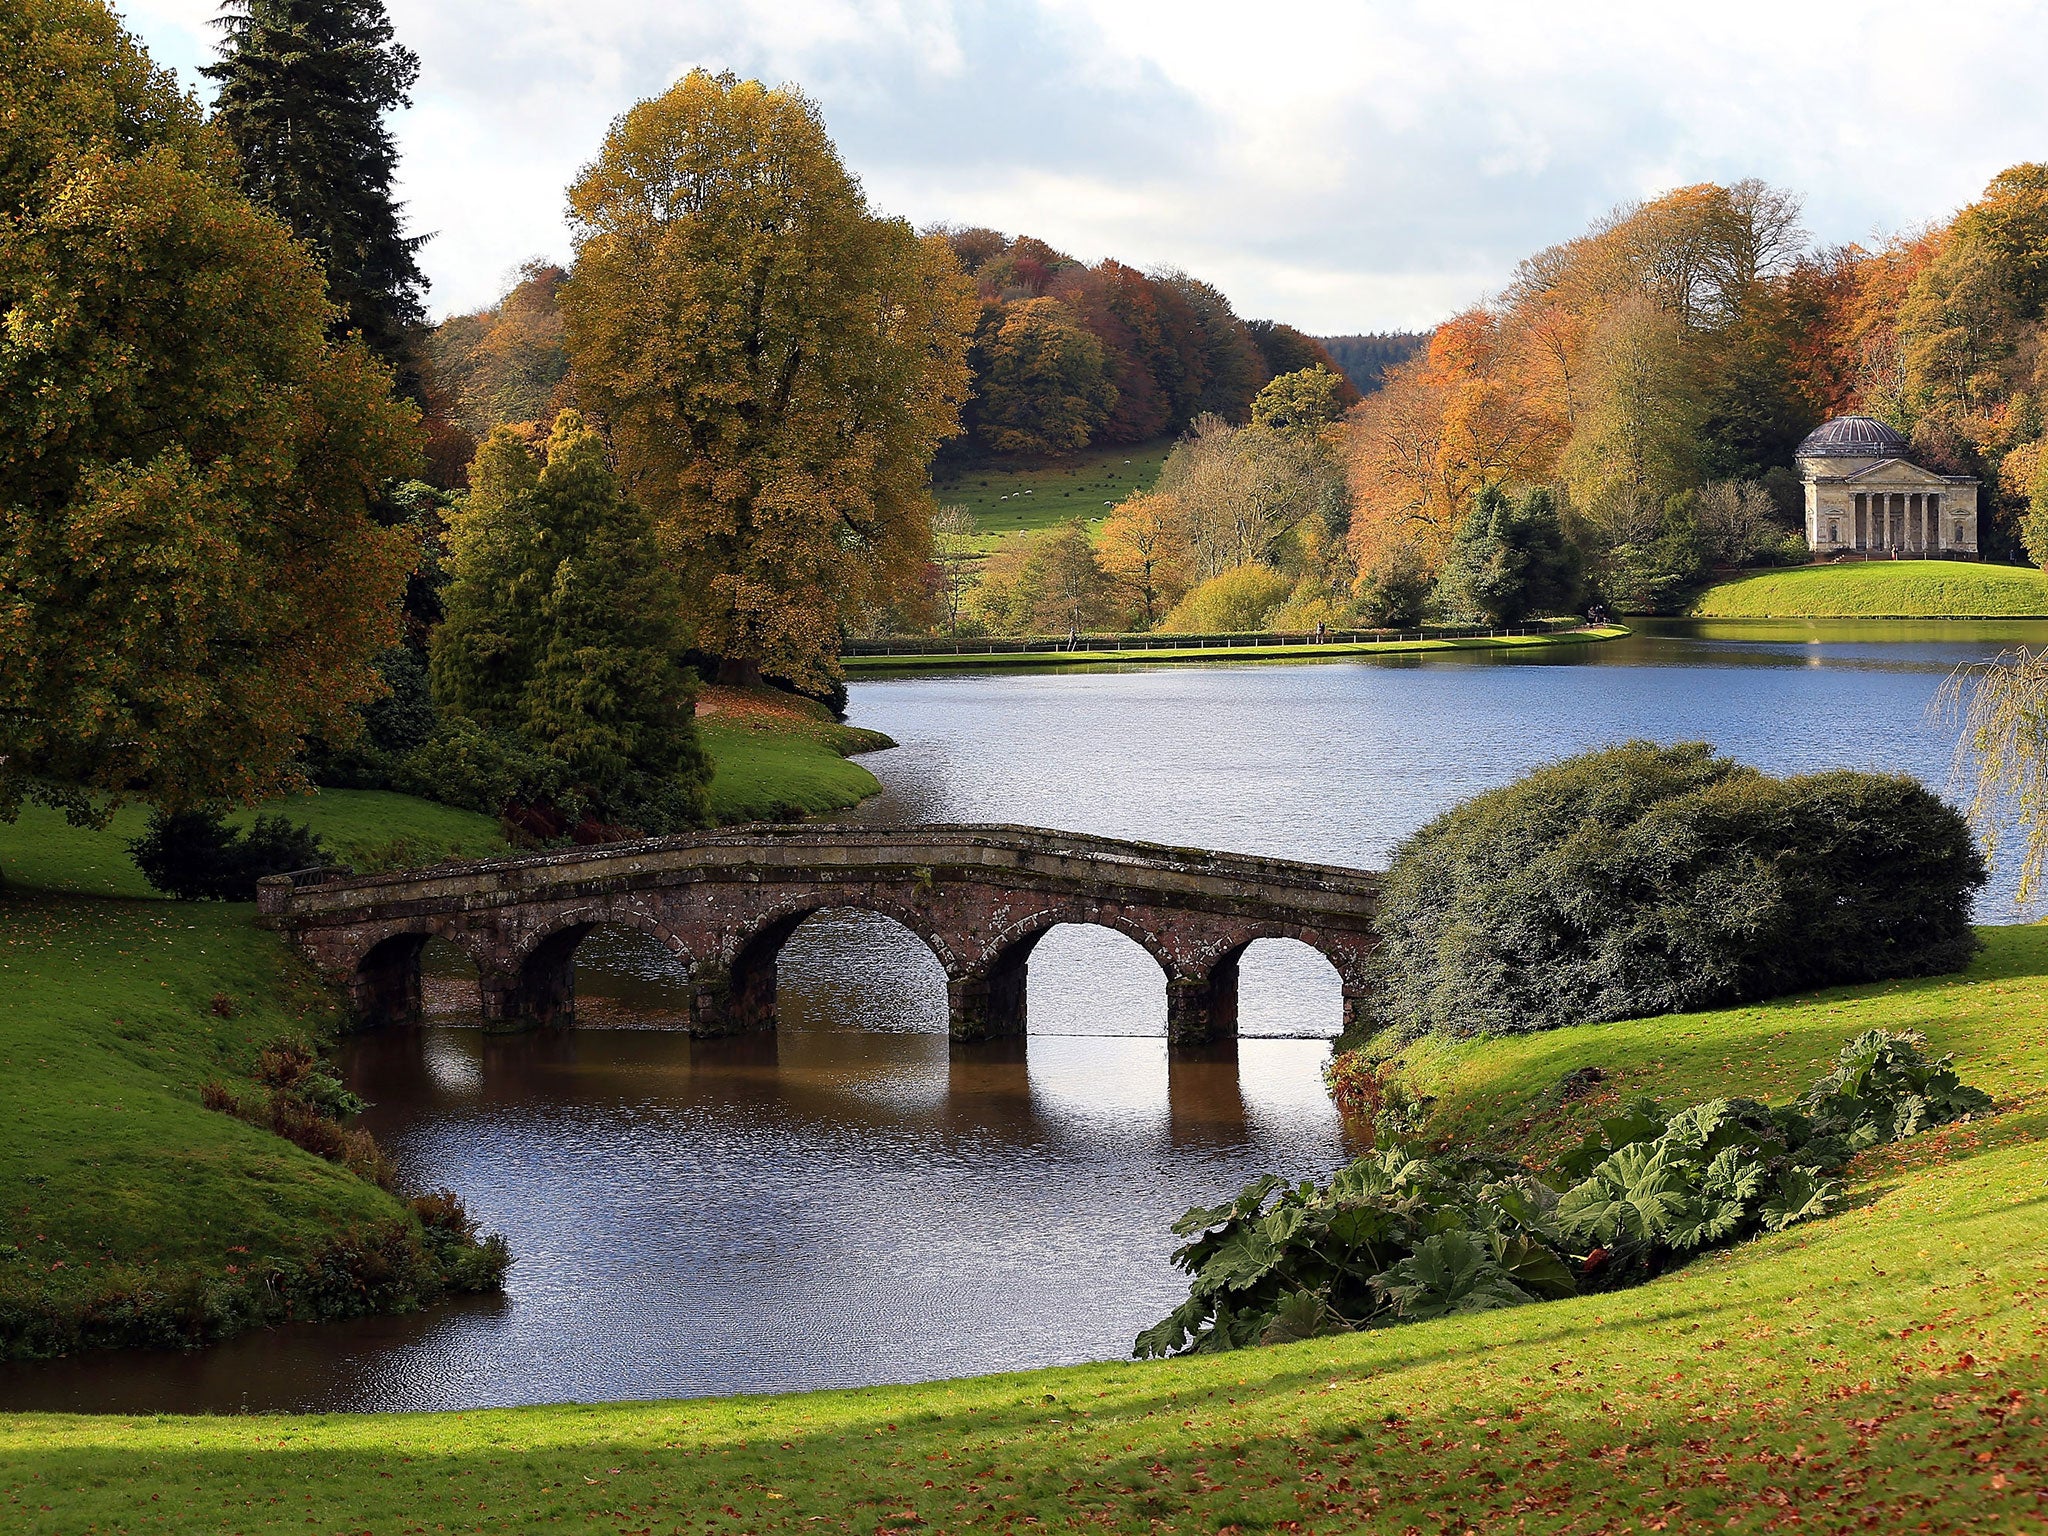 The gardens at the National Trust’s mansion at Stourhead